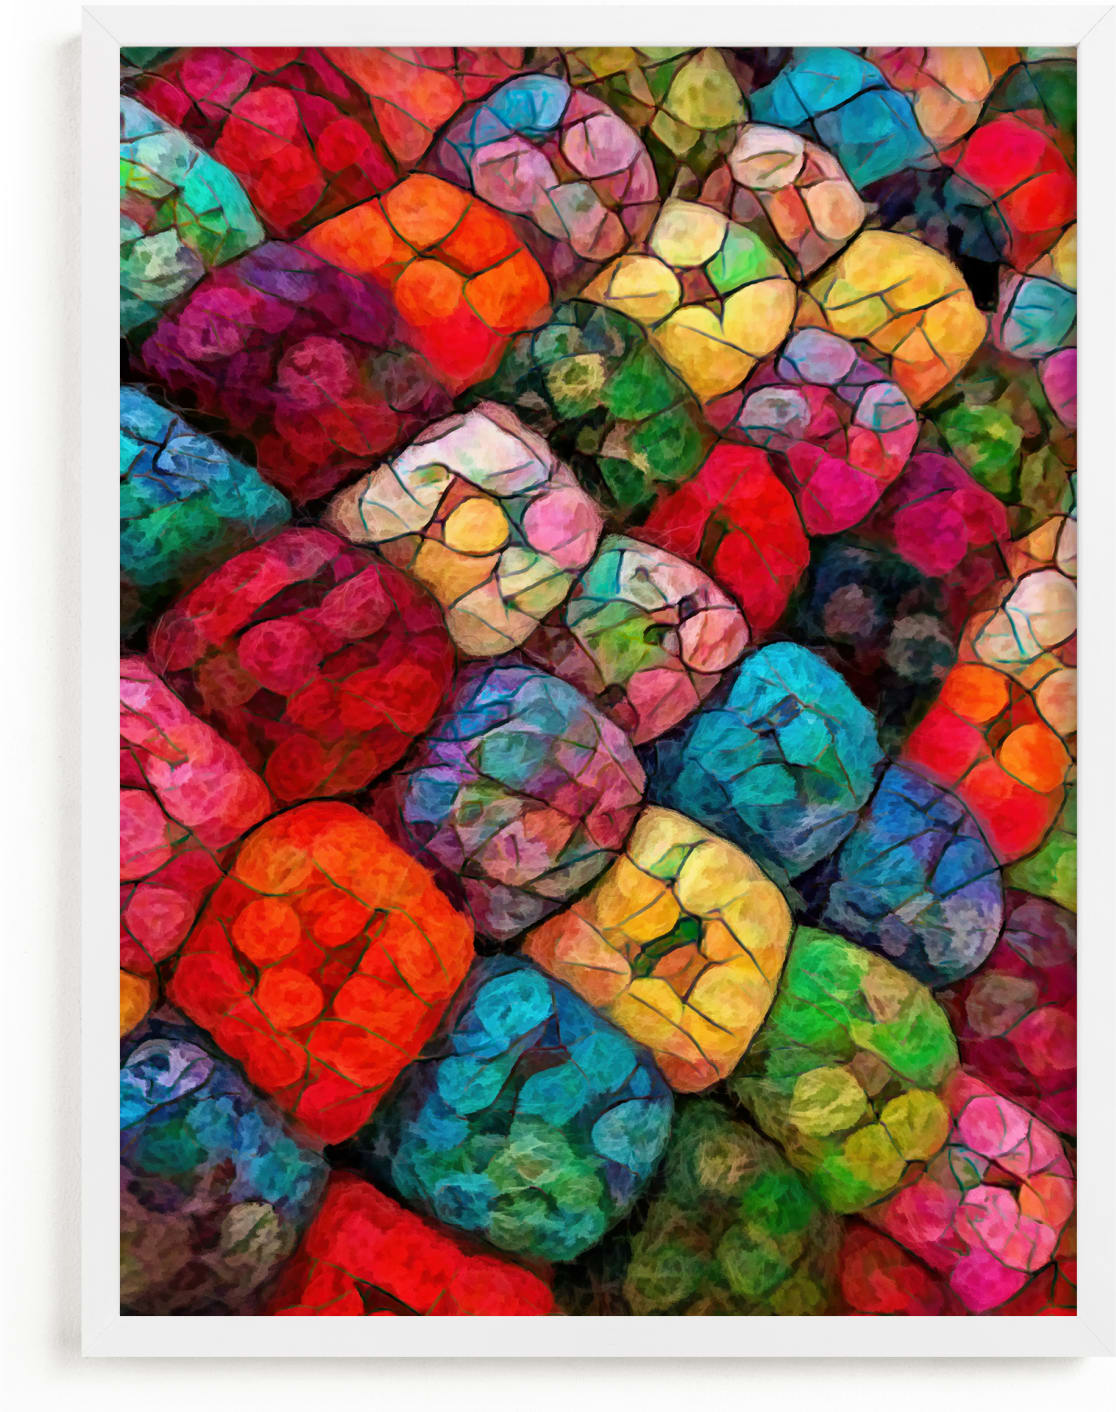 This is a colorful art by A MAZ Design called Abstract Felted Wool I.